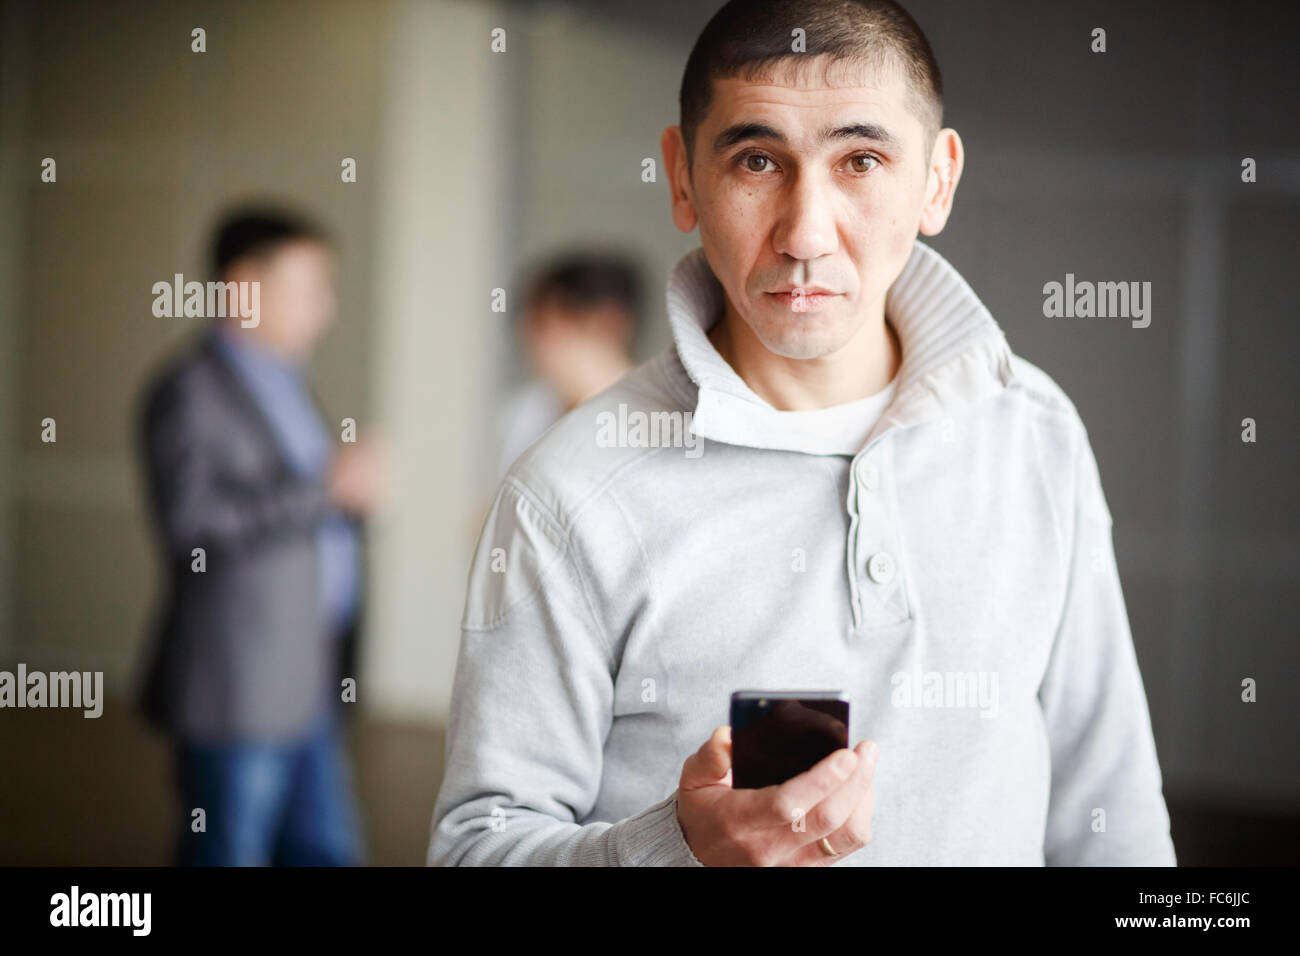 Middle Asian man short haircut with phone in his hand questioning look directly into camera, gets a job. Against background of business men discussing employment. Unemployment, human resources. Stock Photo